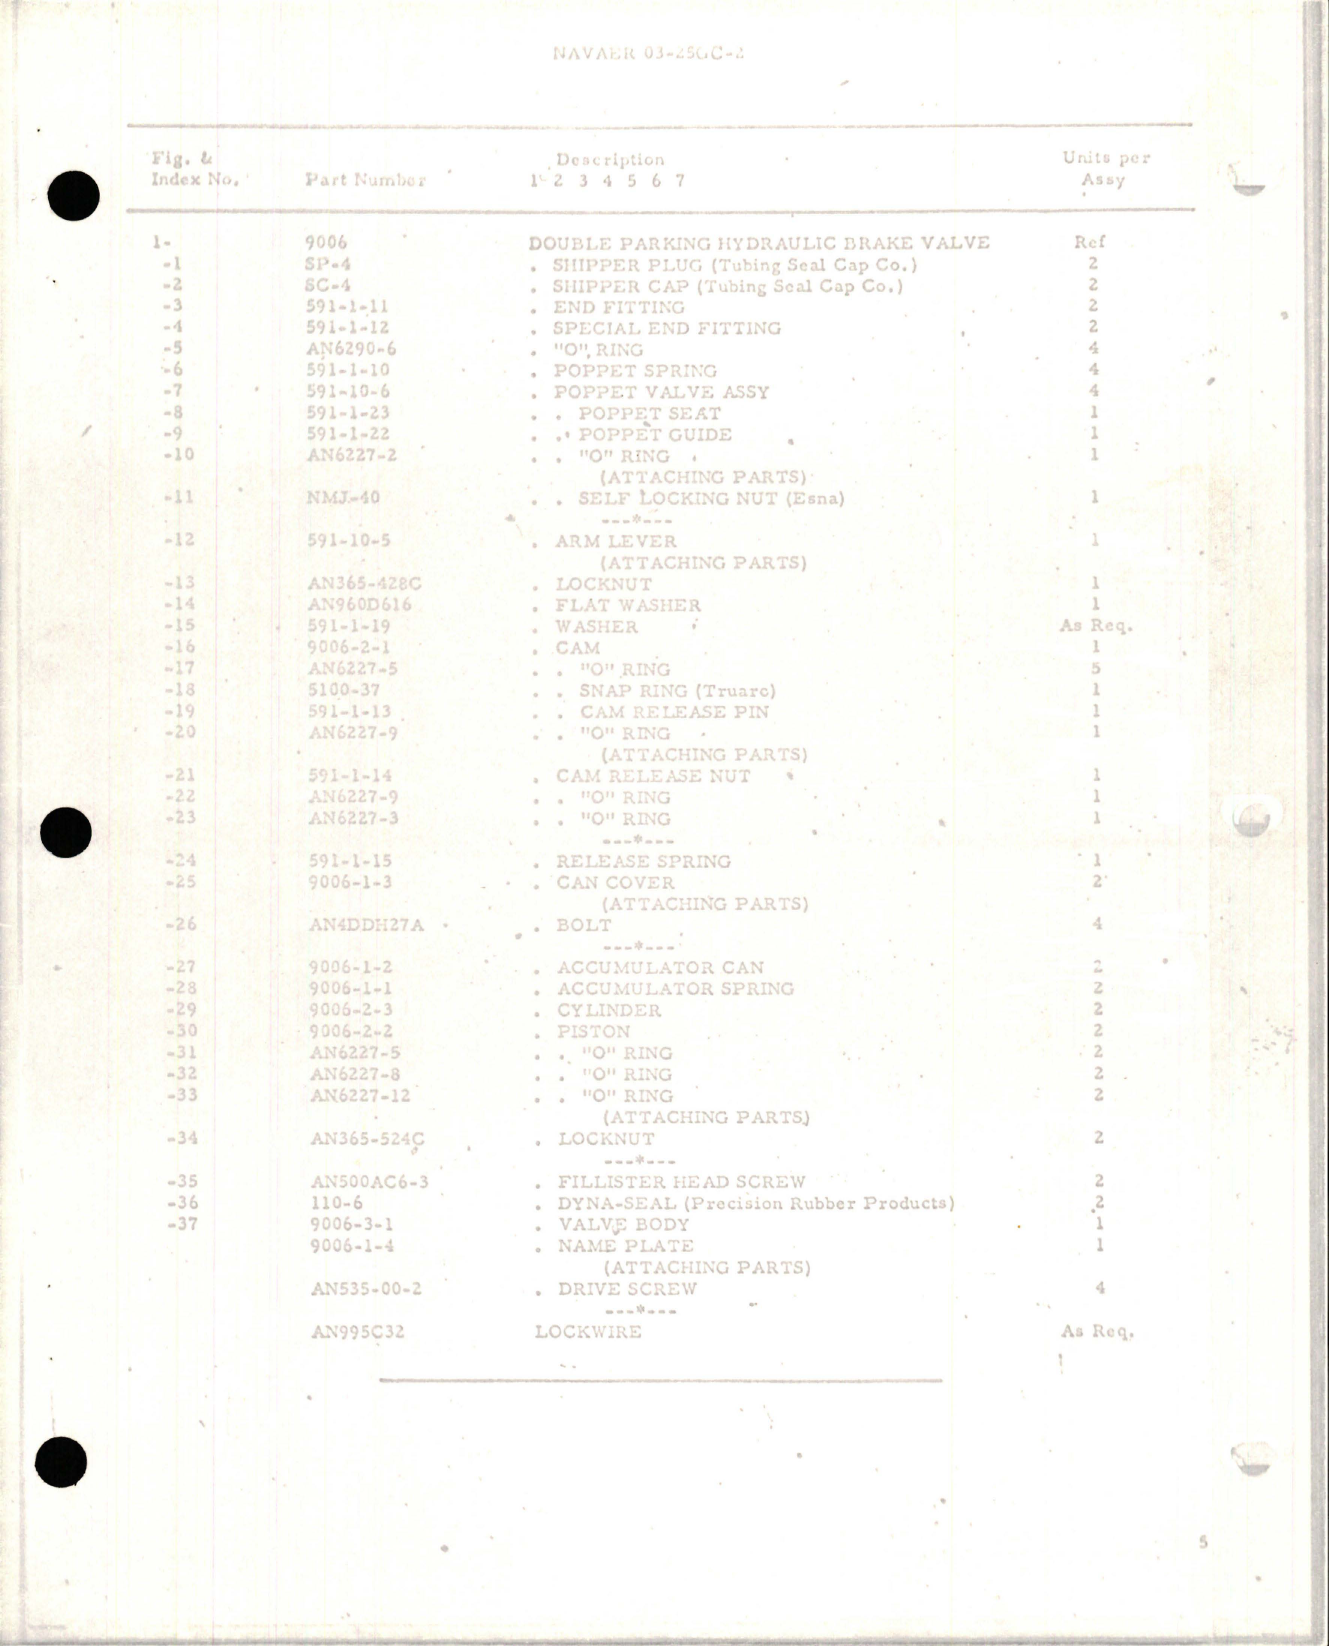 Sample page 5 from AirCorps Library document: Overhaul Instructions with Parts Breakdown for Double Parking Hydraulic Brake Valve - Model 9006